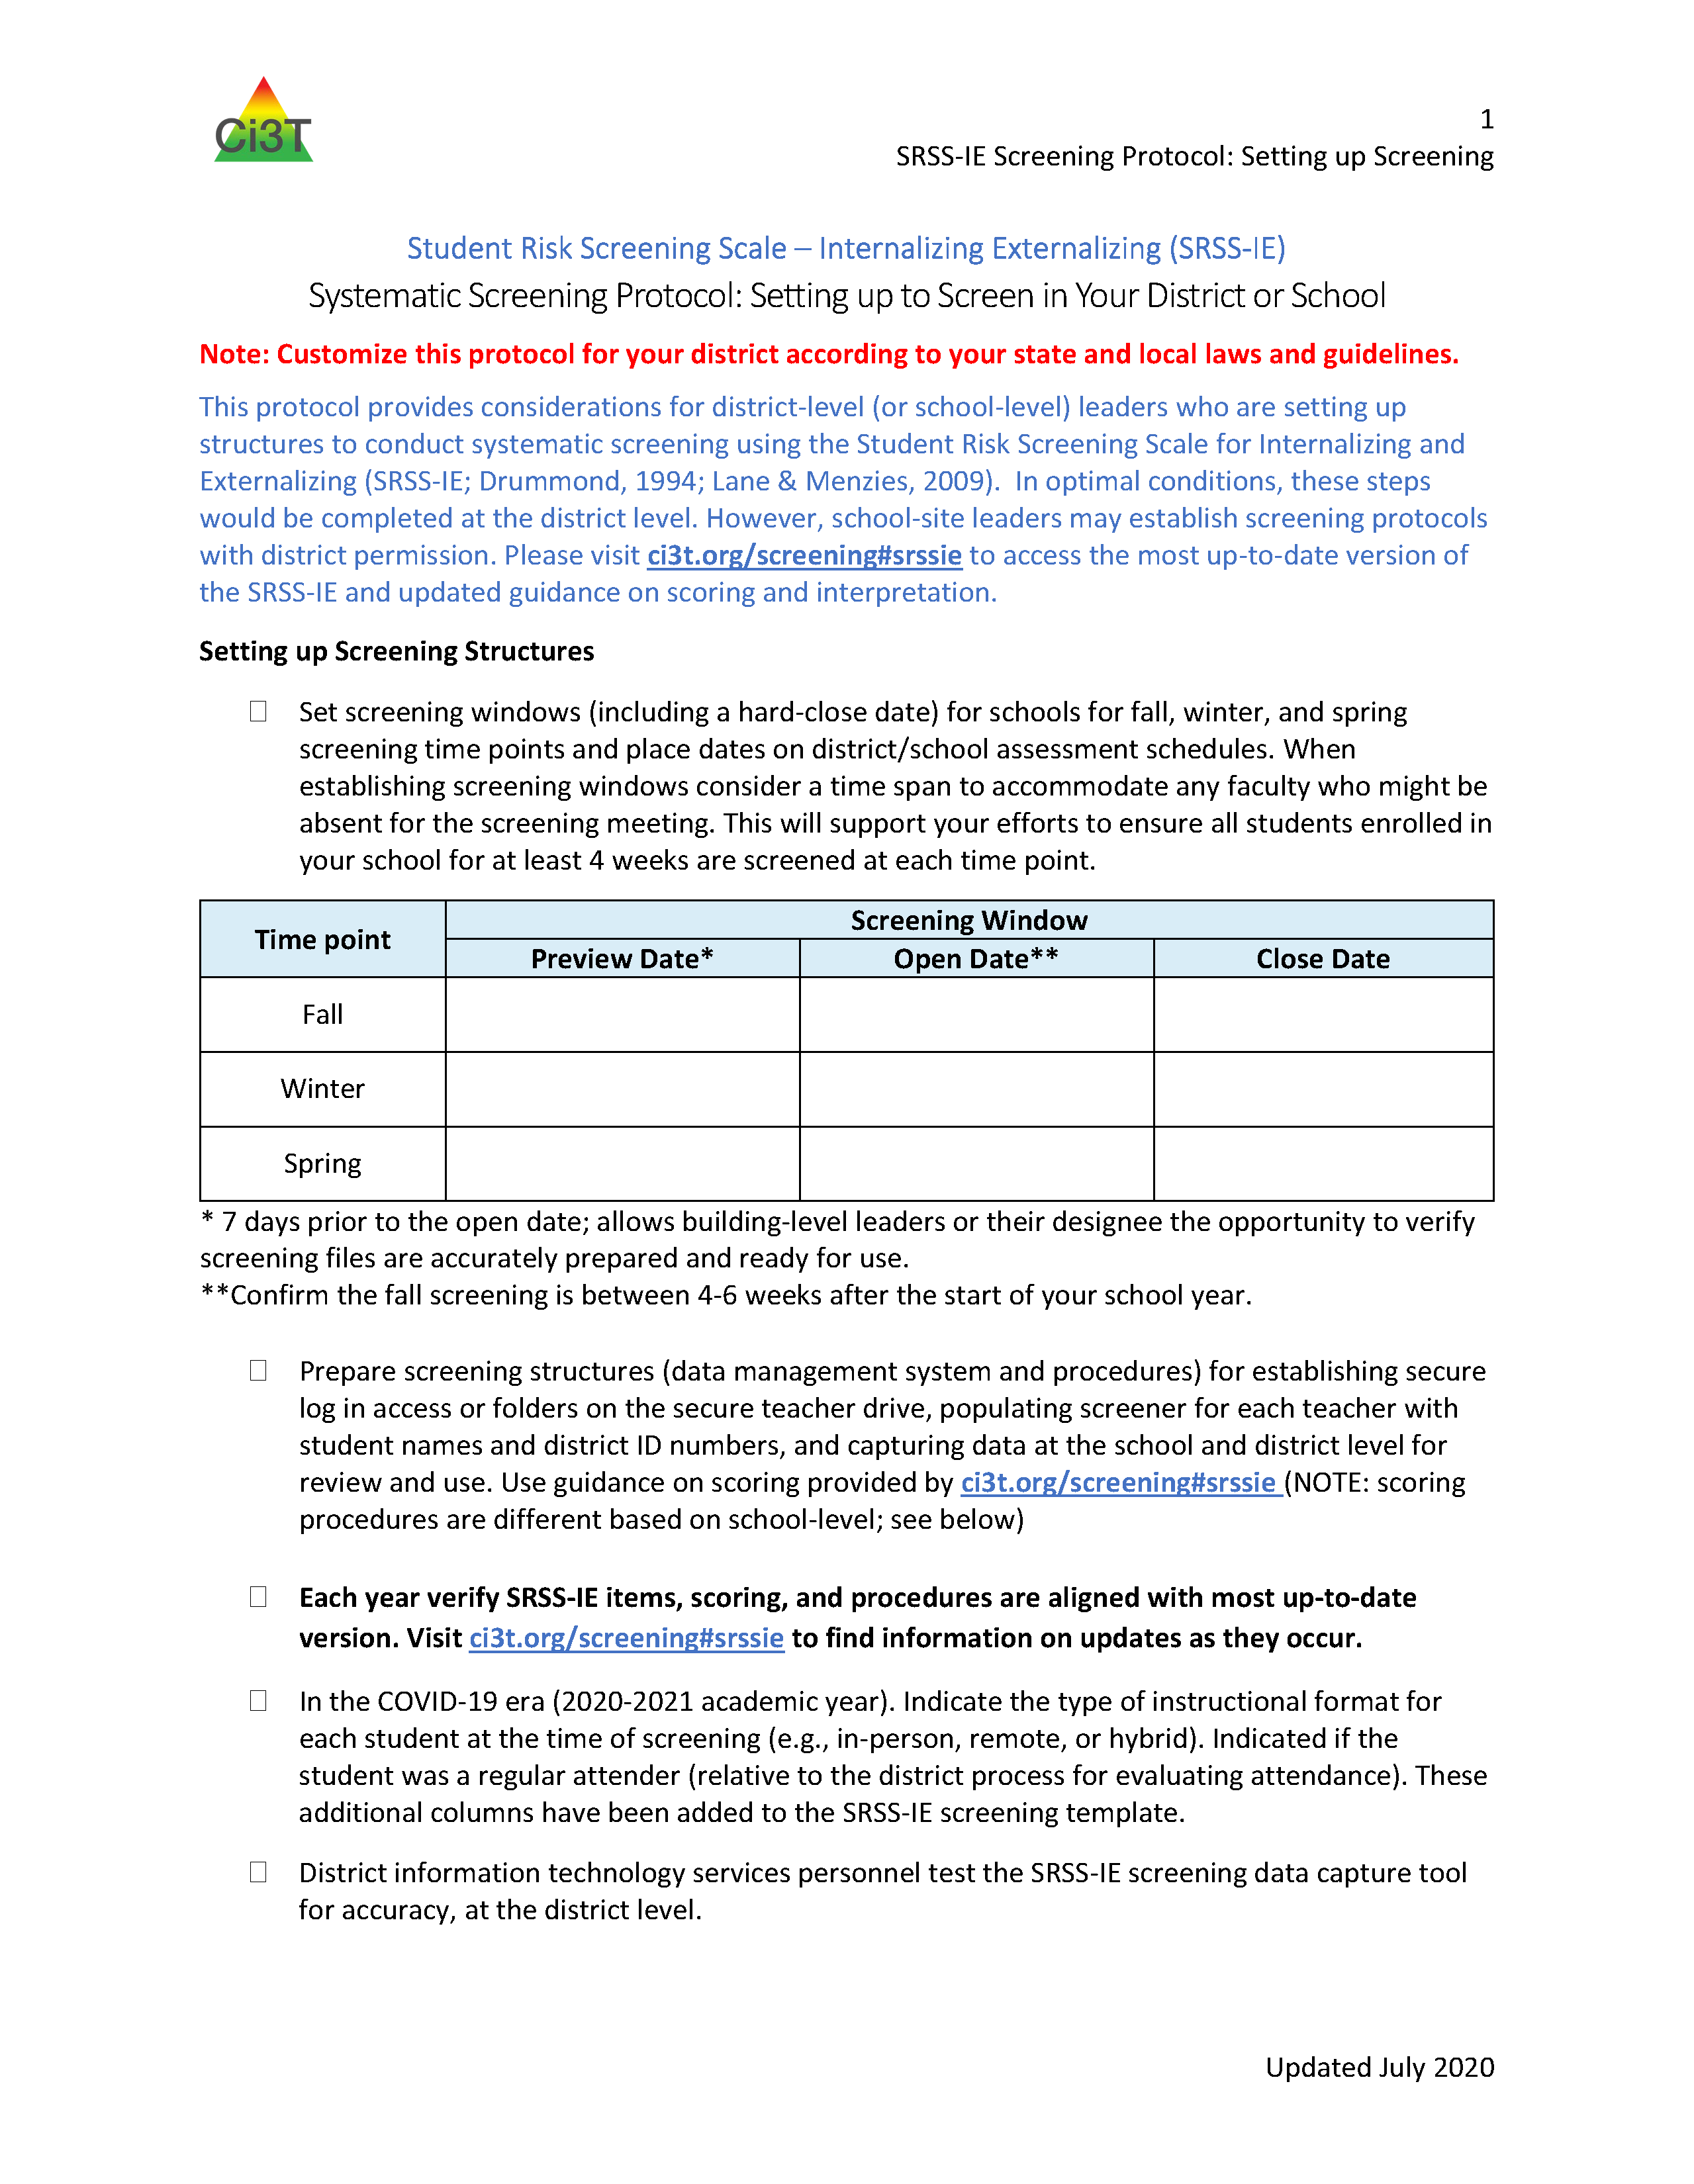 2020 2021 SRSS IE Screening Protocol: Setting up to Screen in Your District or School